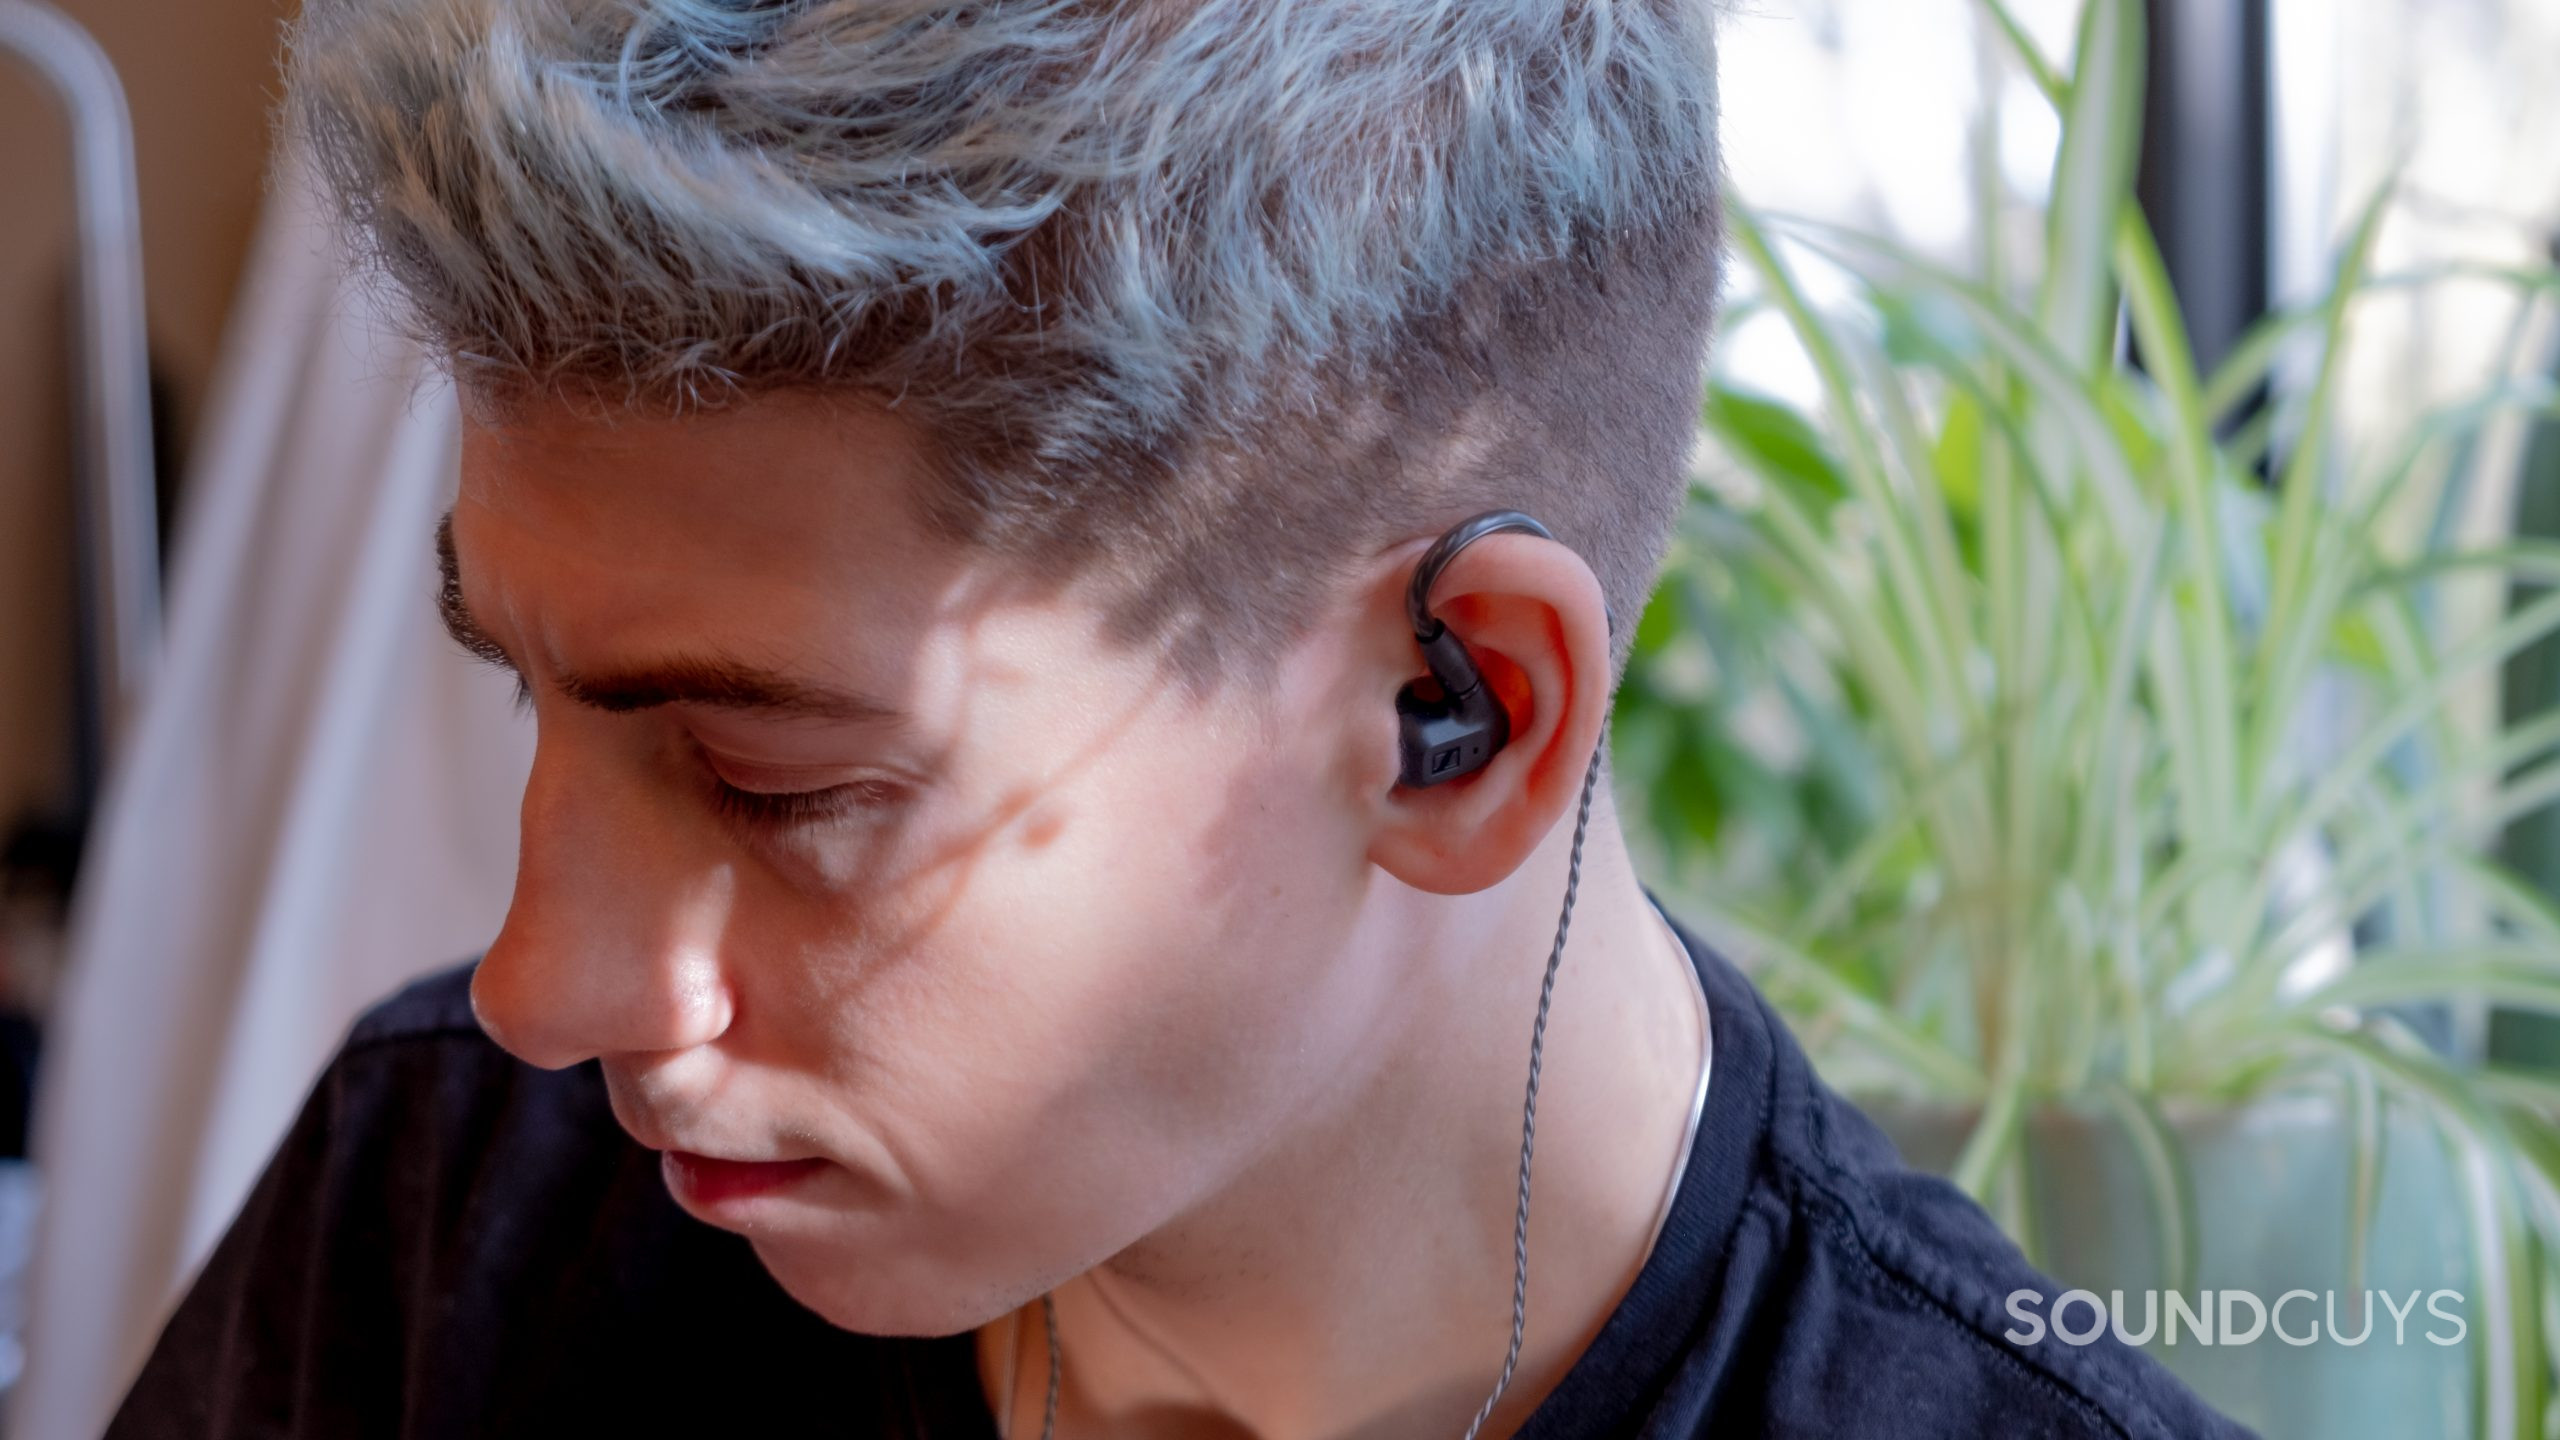 A man wears the Sennheiser IE 200 IEMs with an aloe plant in the background.